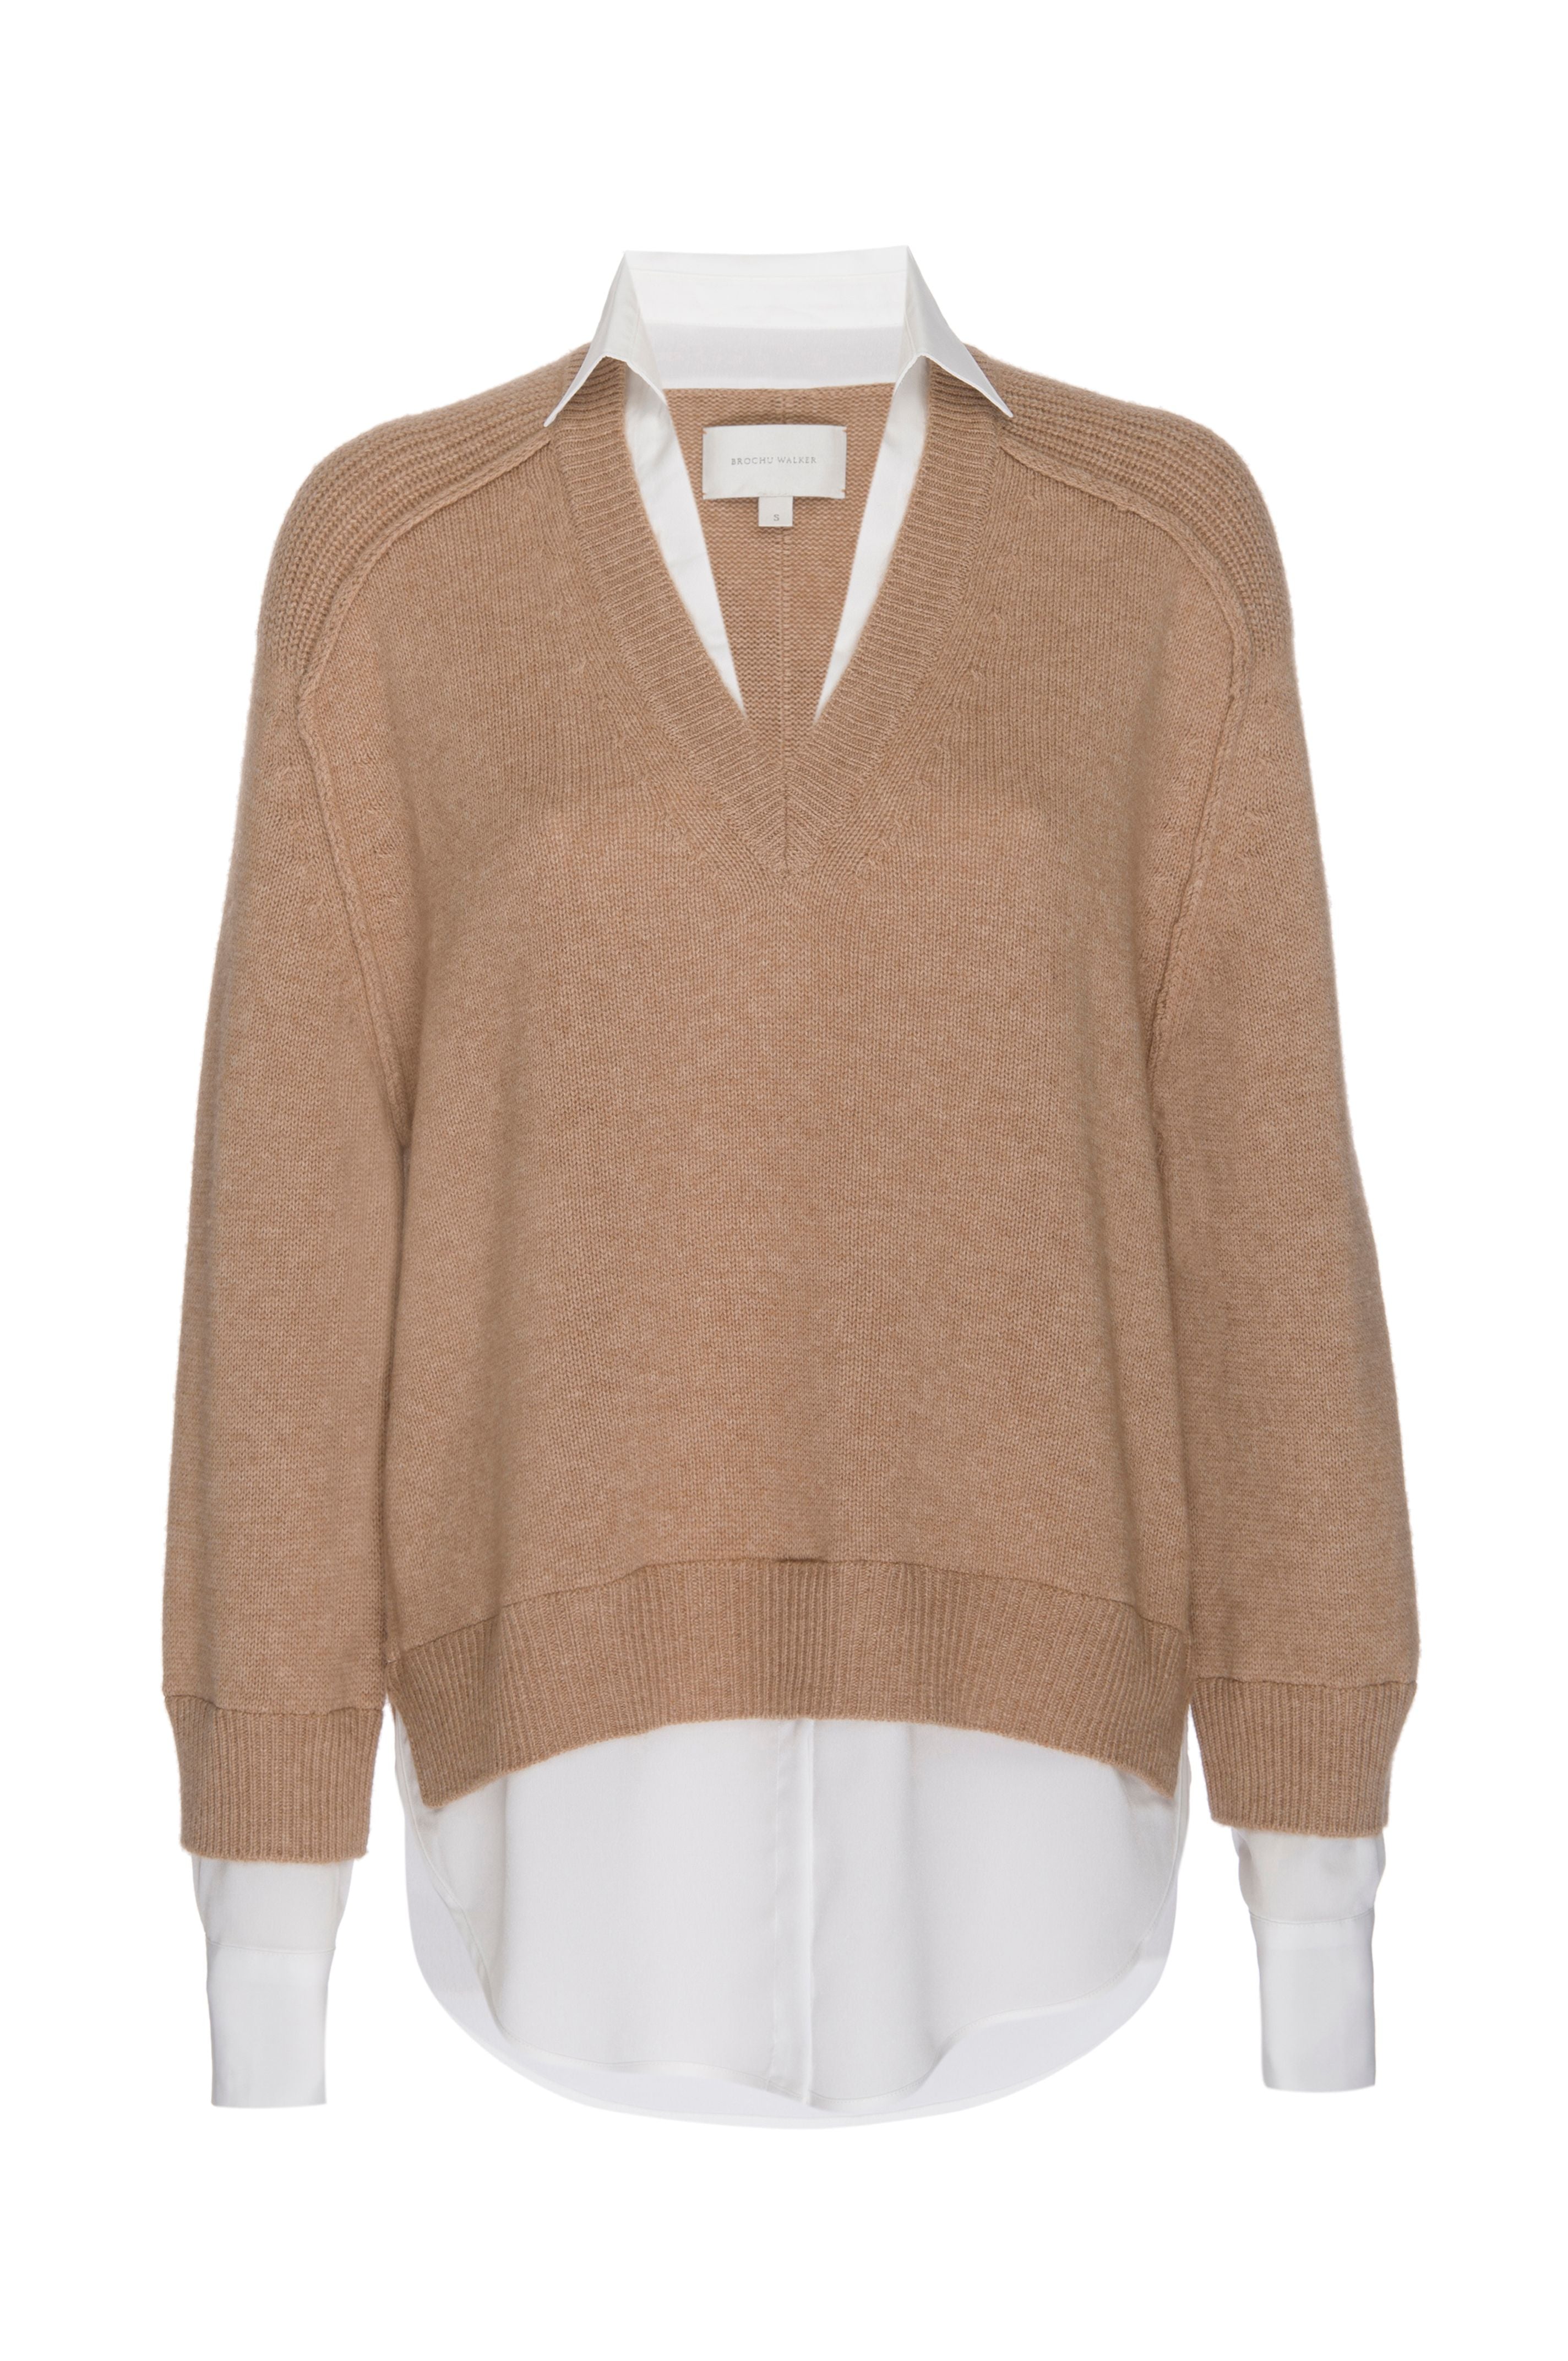 looker tan layered v-neck sweater flat view